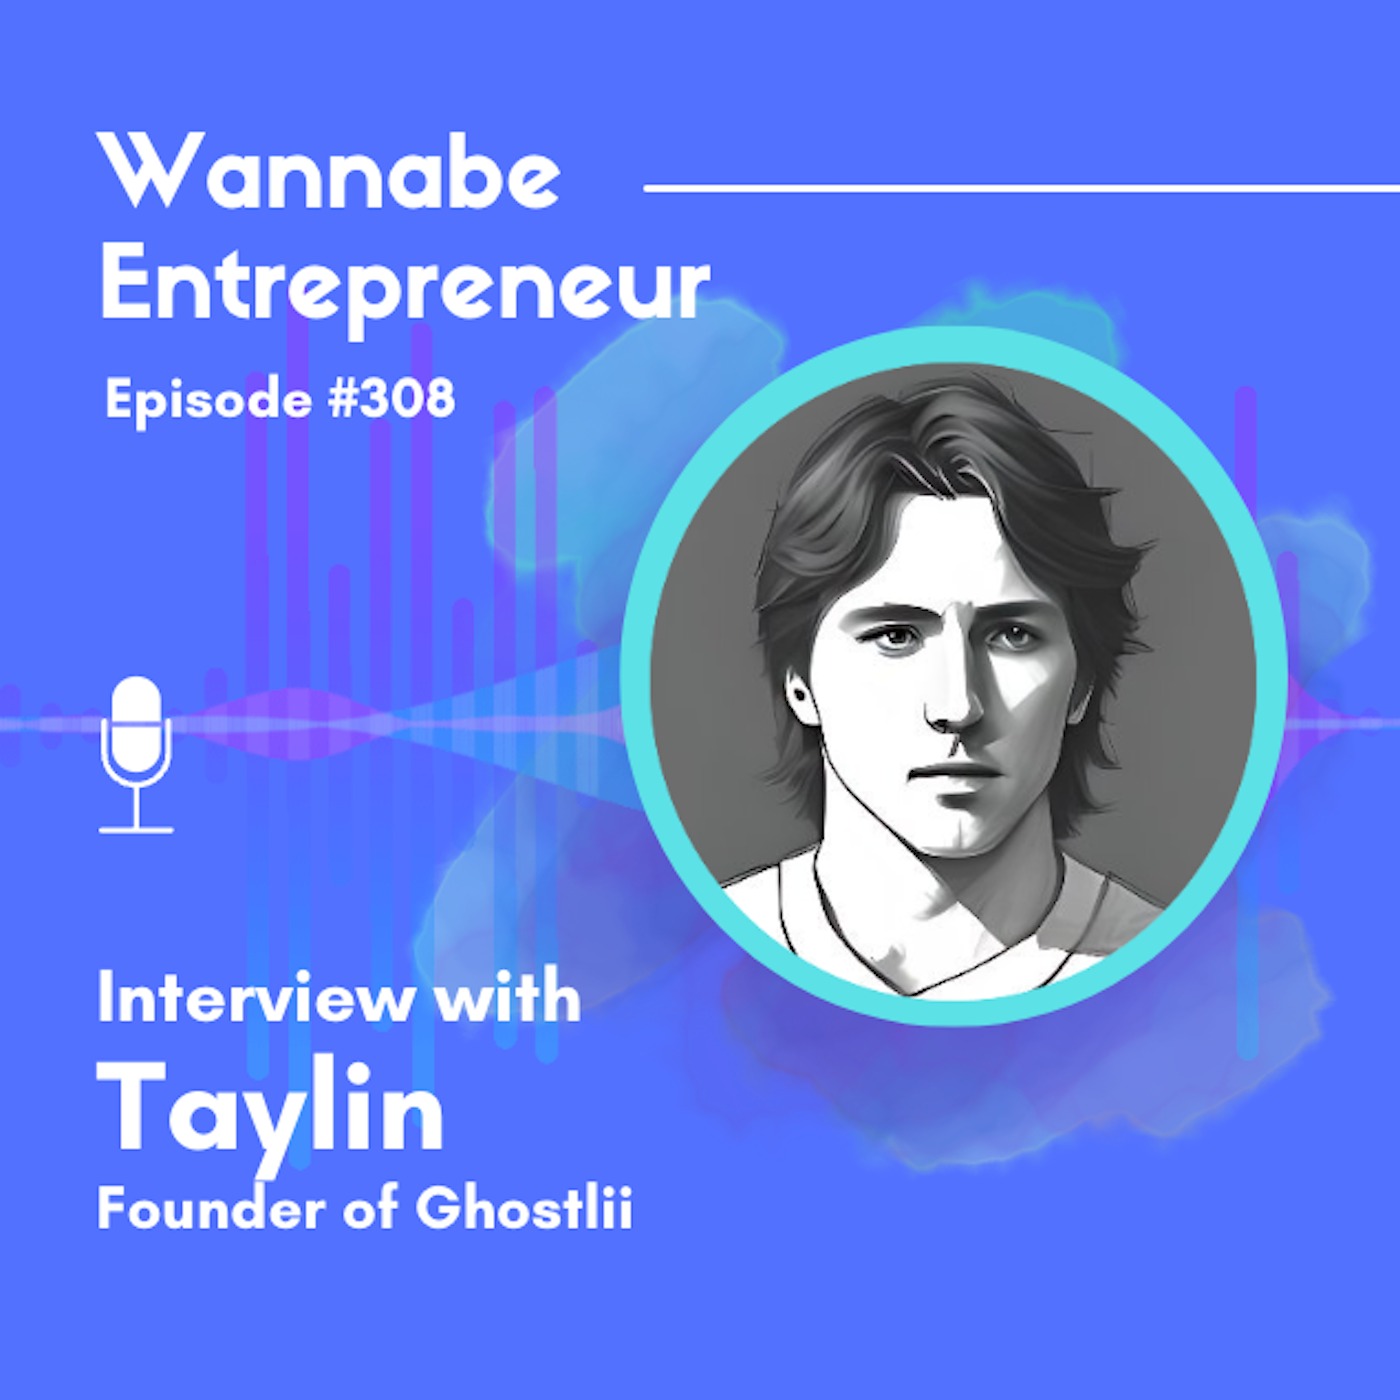 Interviewing Taylin Simmonds Founder of Ghostlii